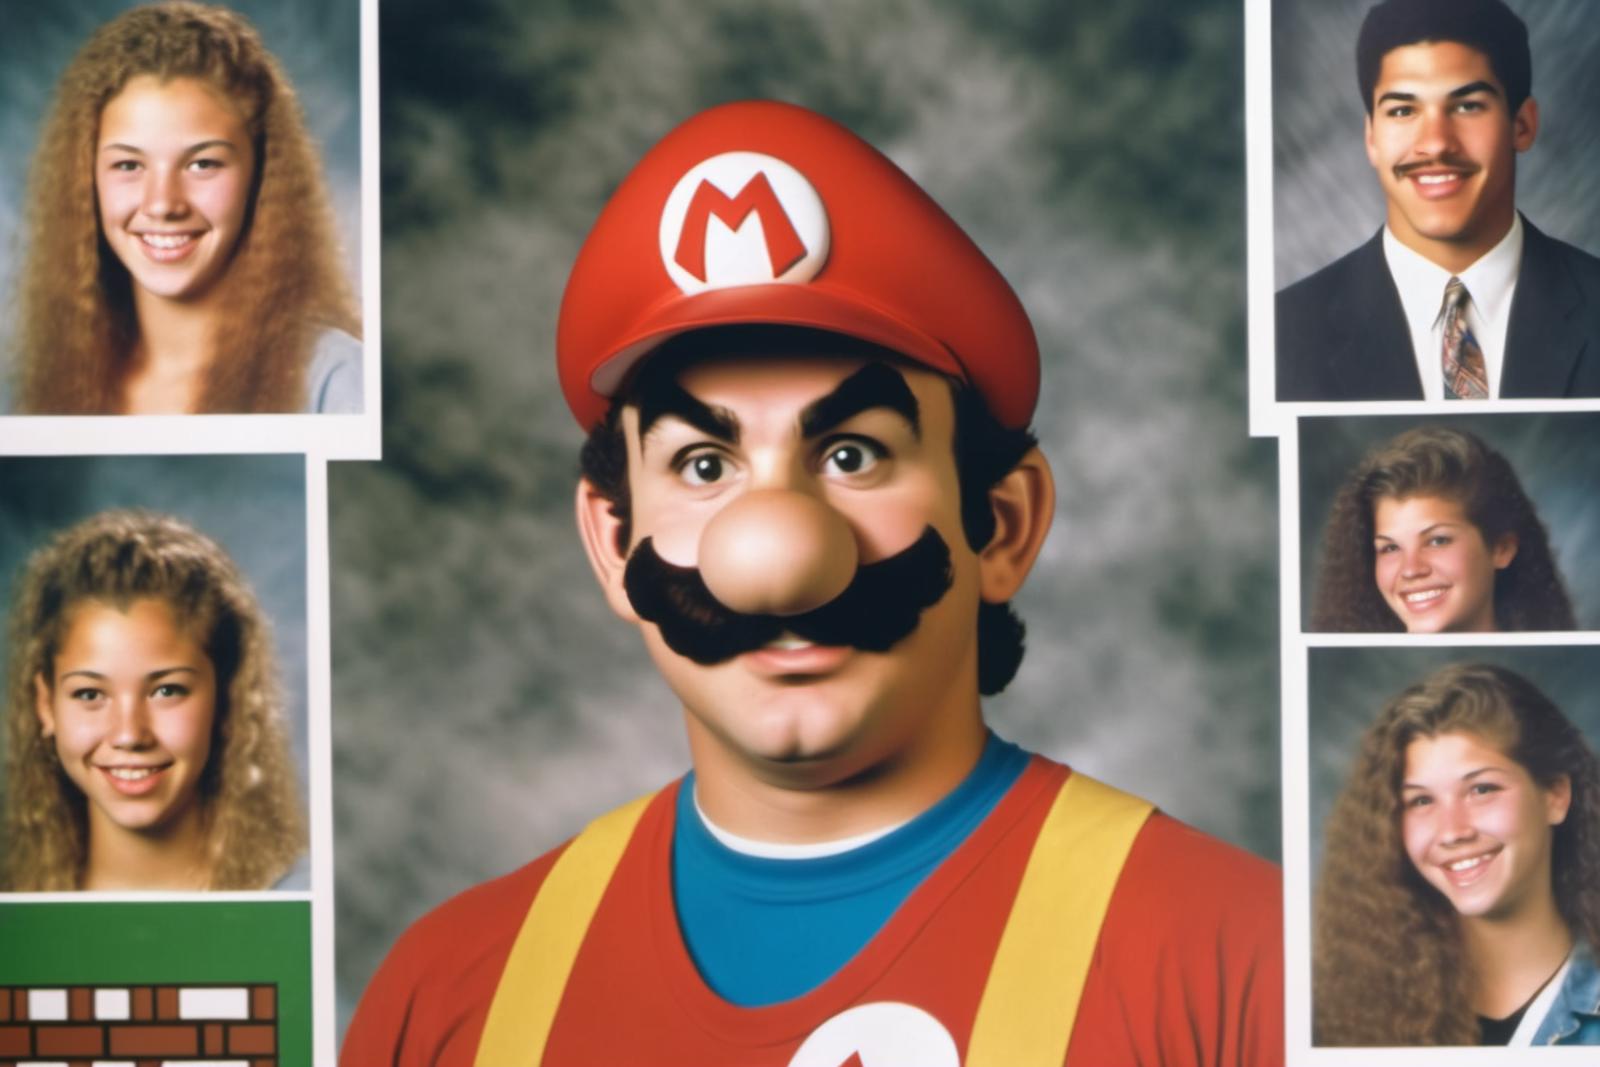 A man dressed as Mario poses for the camera.